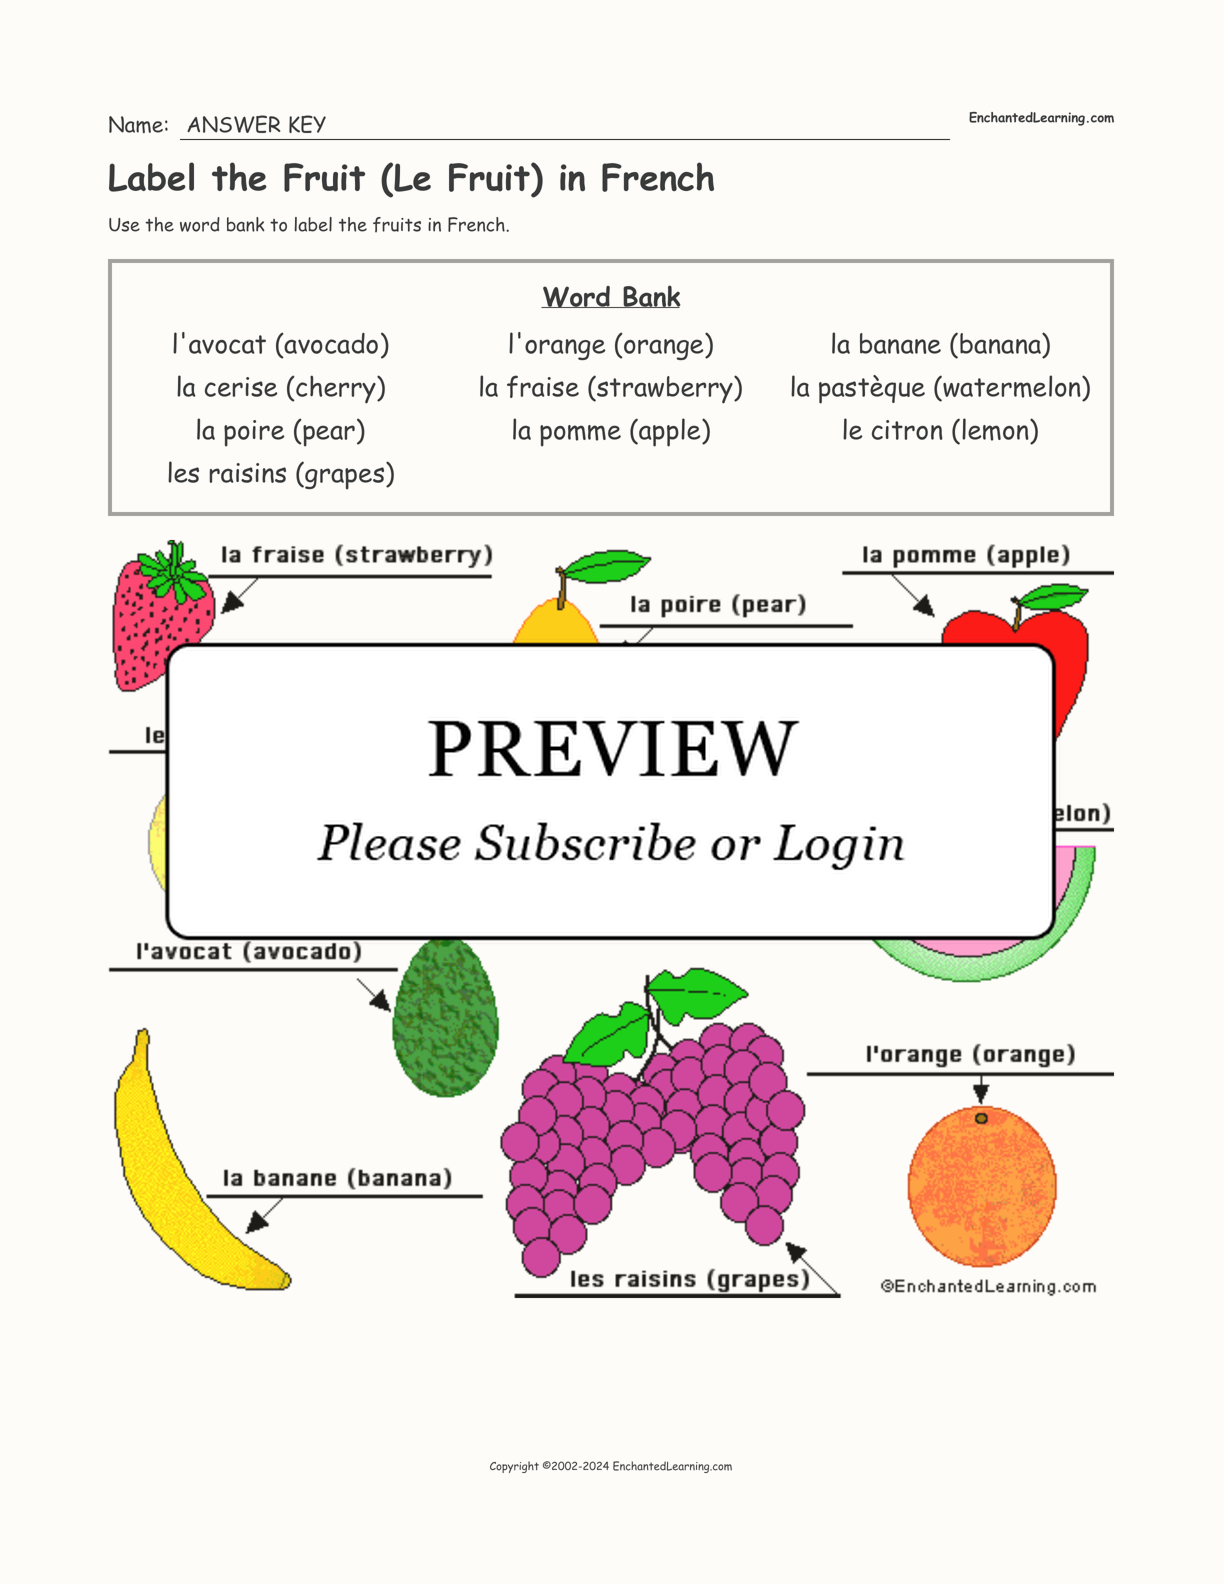 Label the Fruit (Le Fruit) in French interactive worksheet page 2